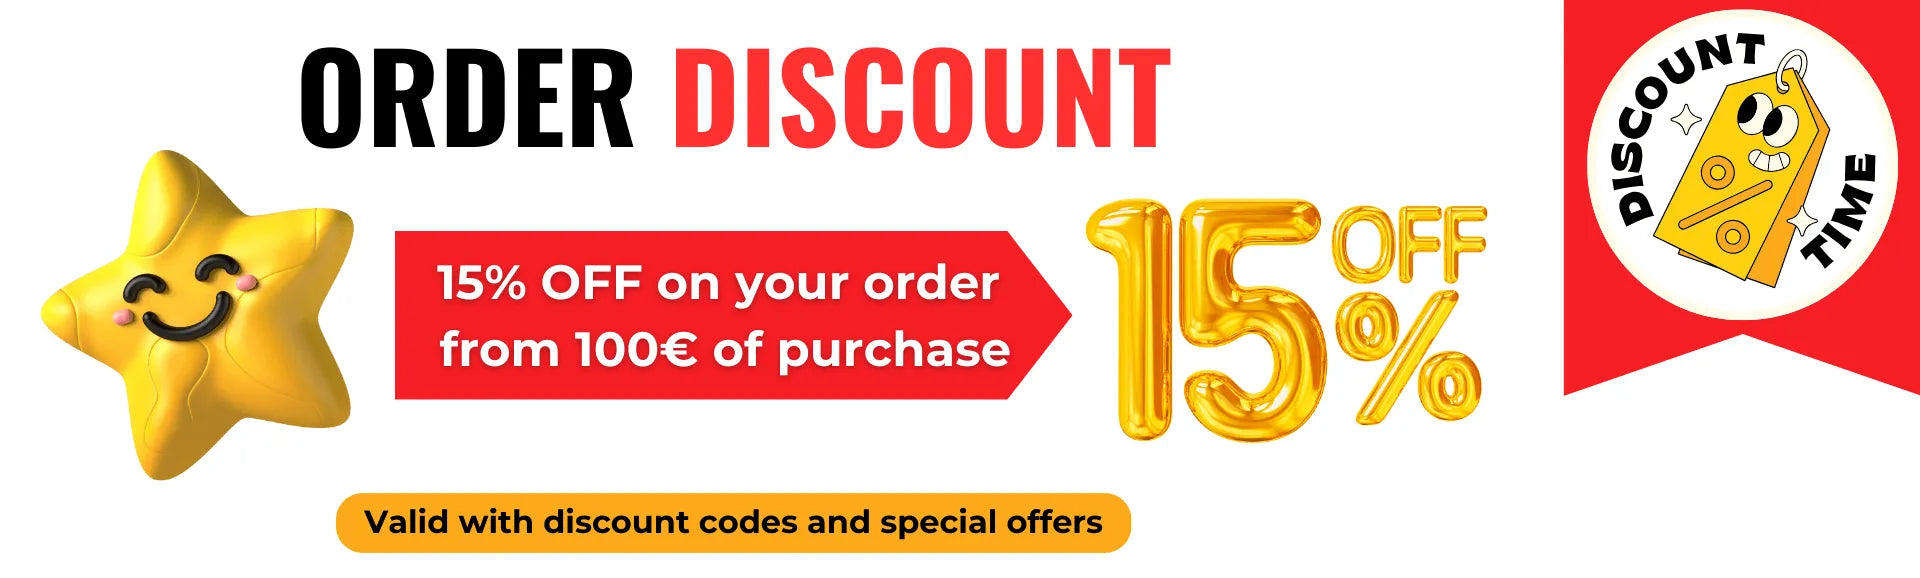 BAI-DAY - Discount Cart - 15% Off on Order